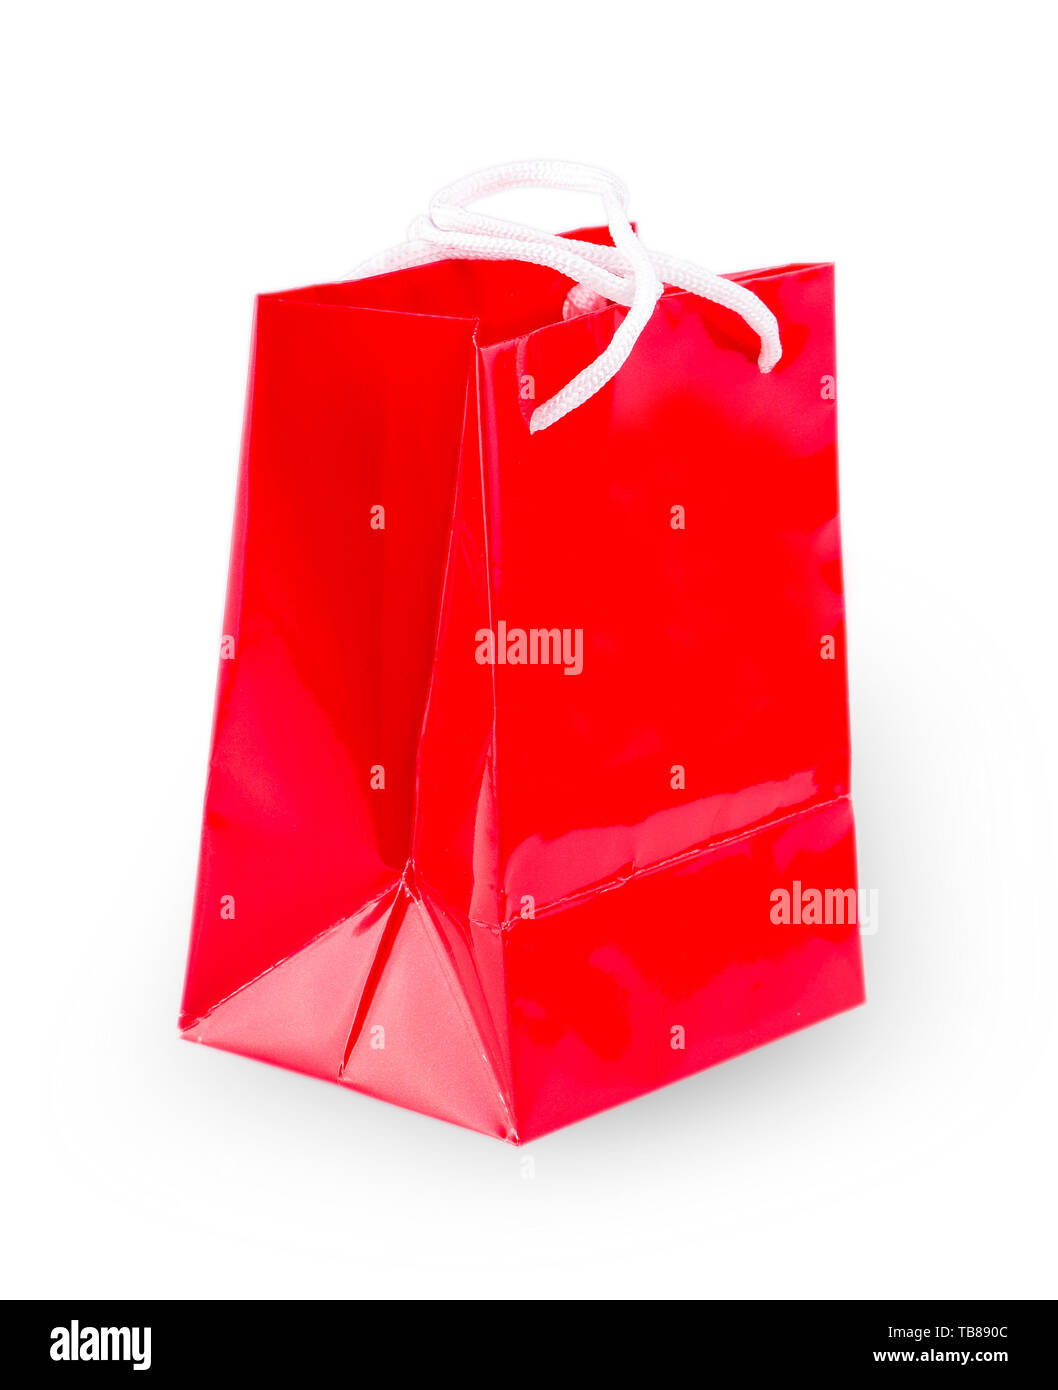 Shopping red paper bag template with clean blank. Single cardboard ...